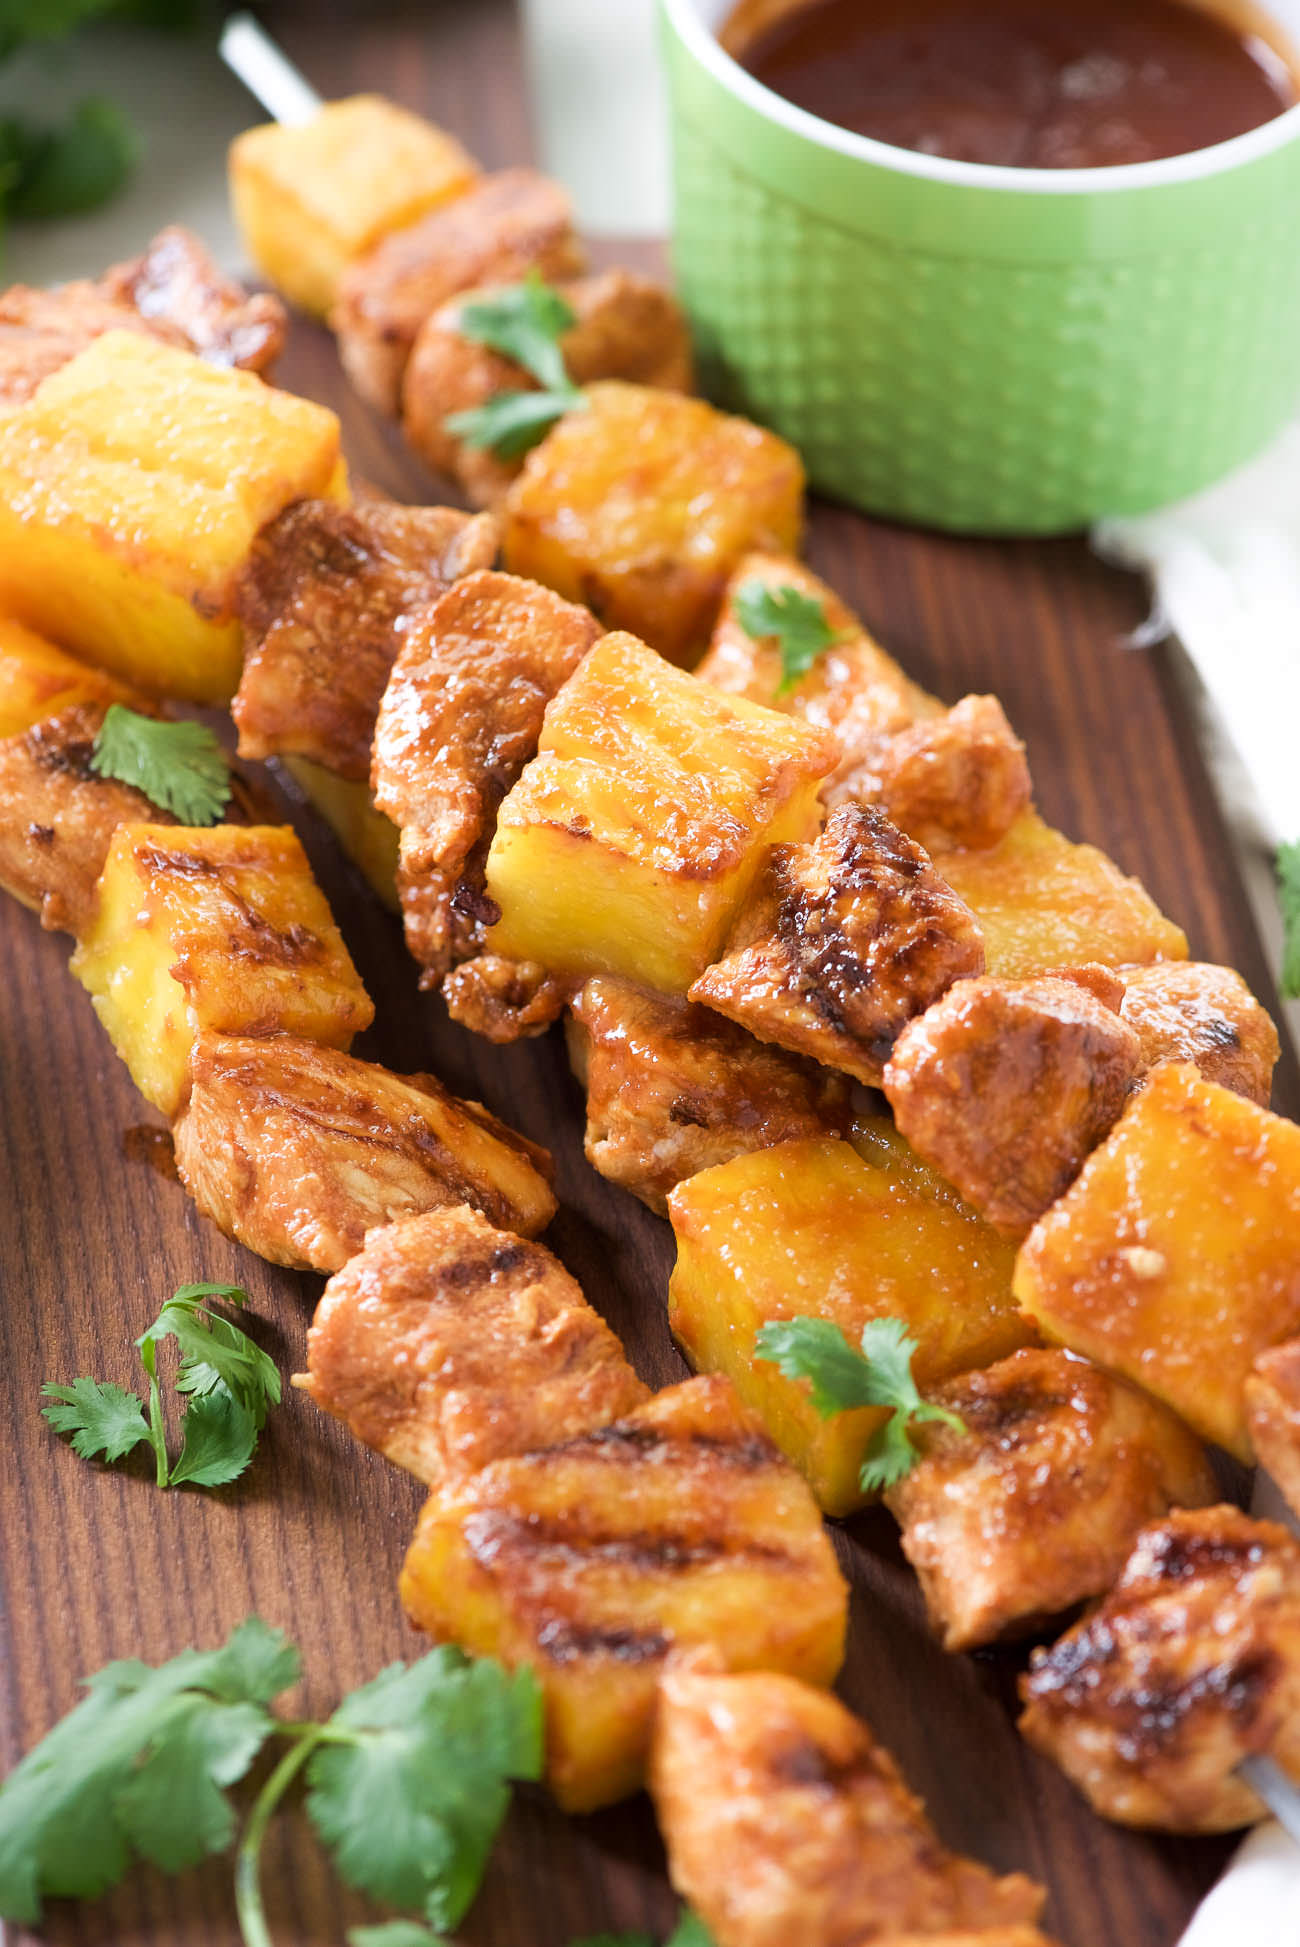 Grilled Huli Huli Chicken Kabobs - Juicy pineapple and tender chicken coated in a sweet and savory glaze then grilled to perfection! The perfect summertime, quick dinner!